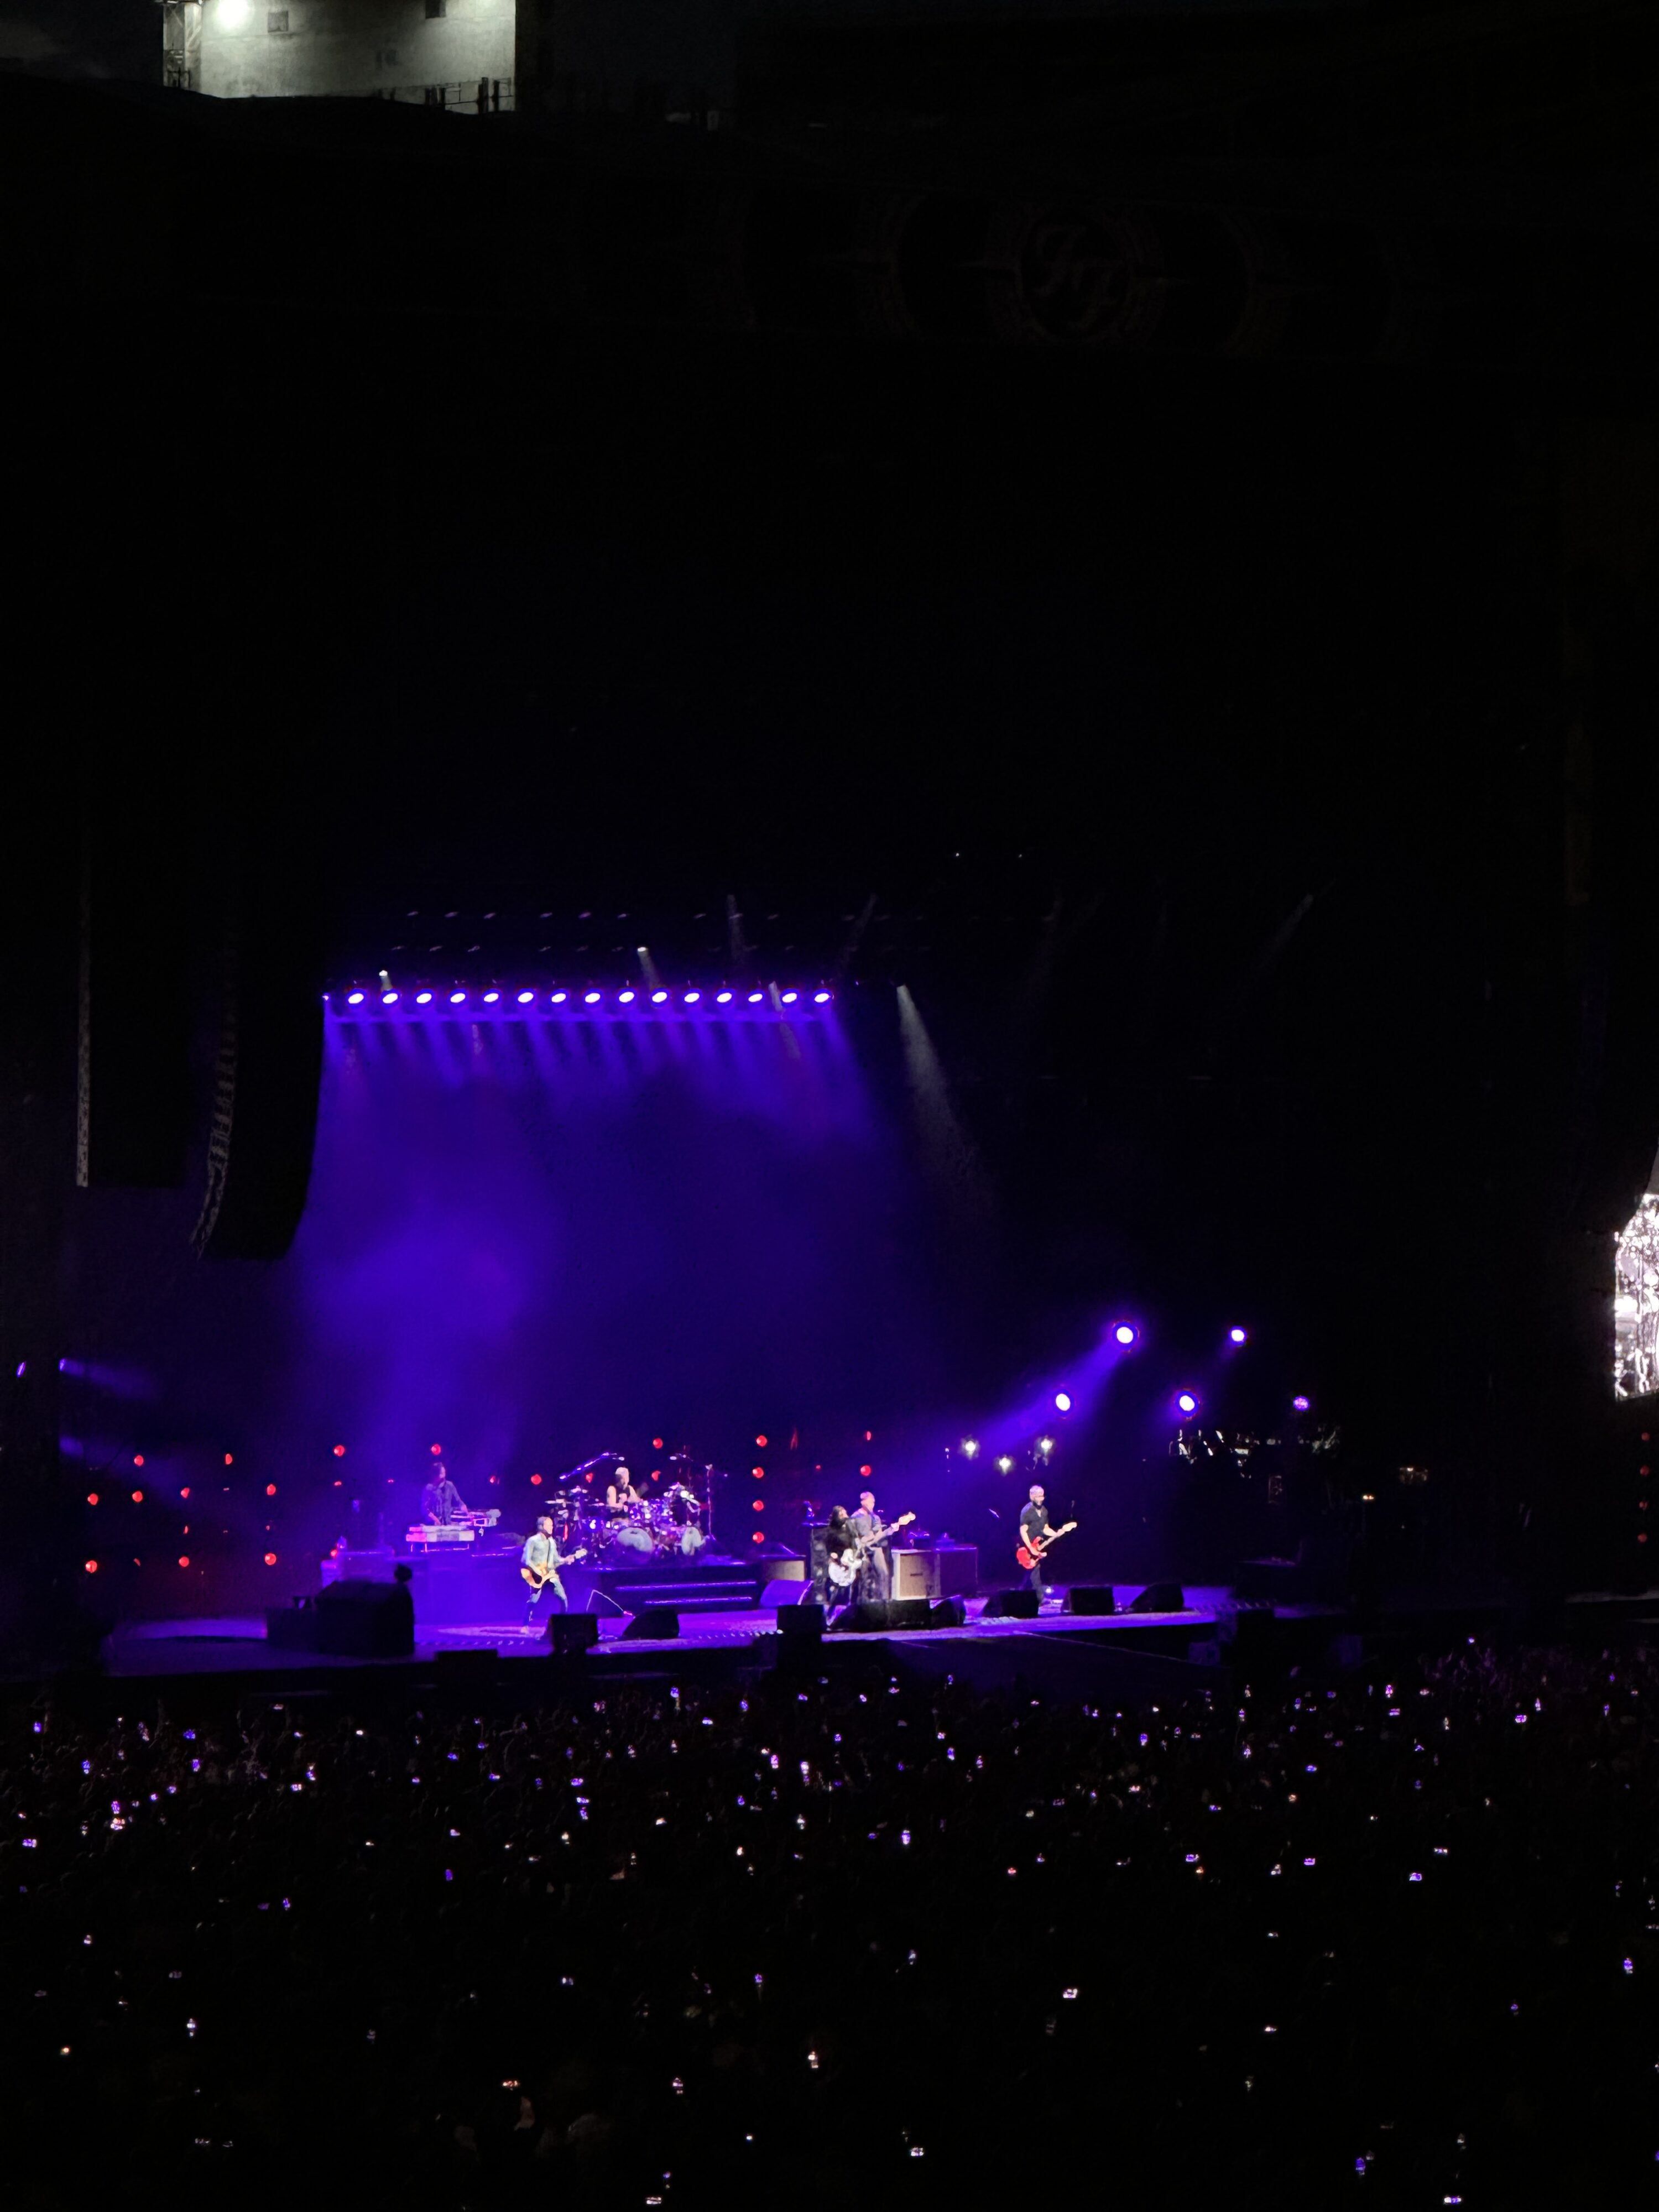 a band on stage with purple lights